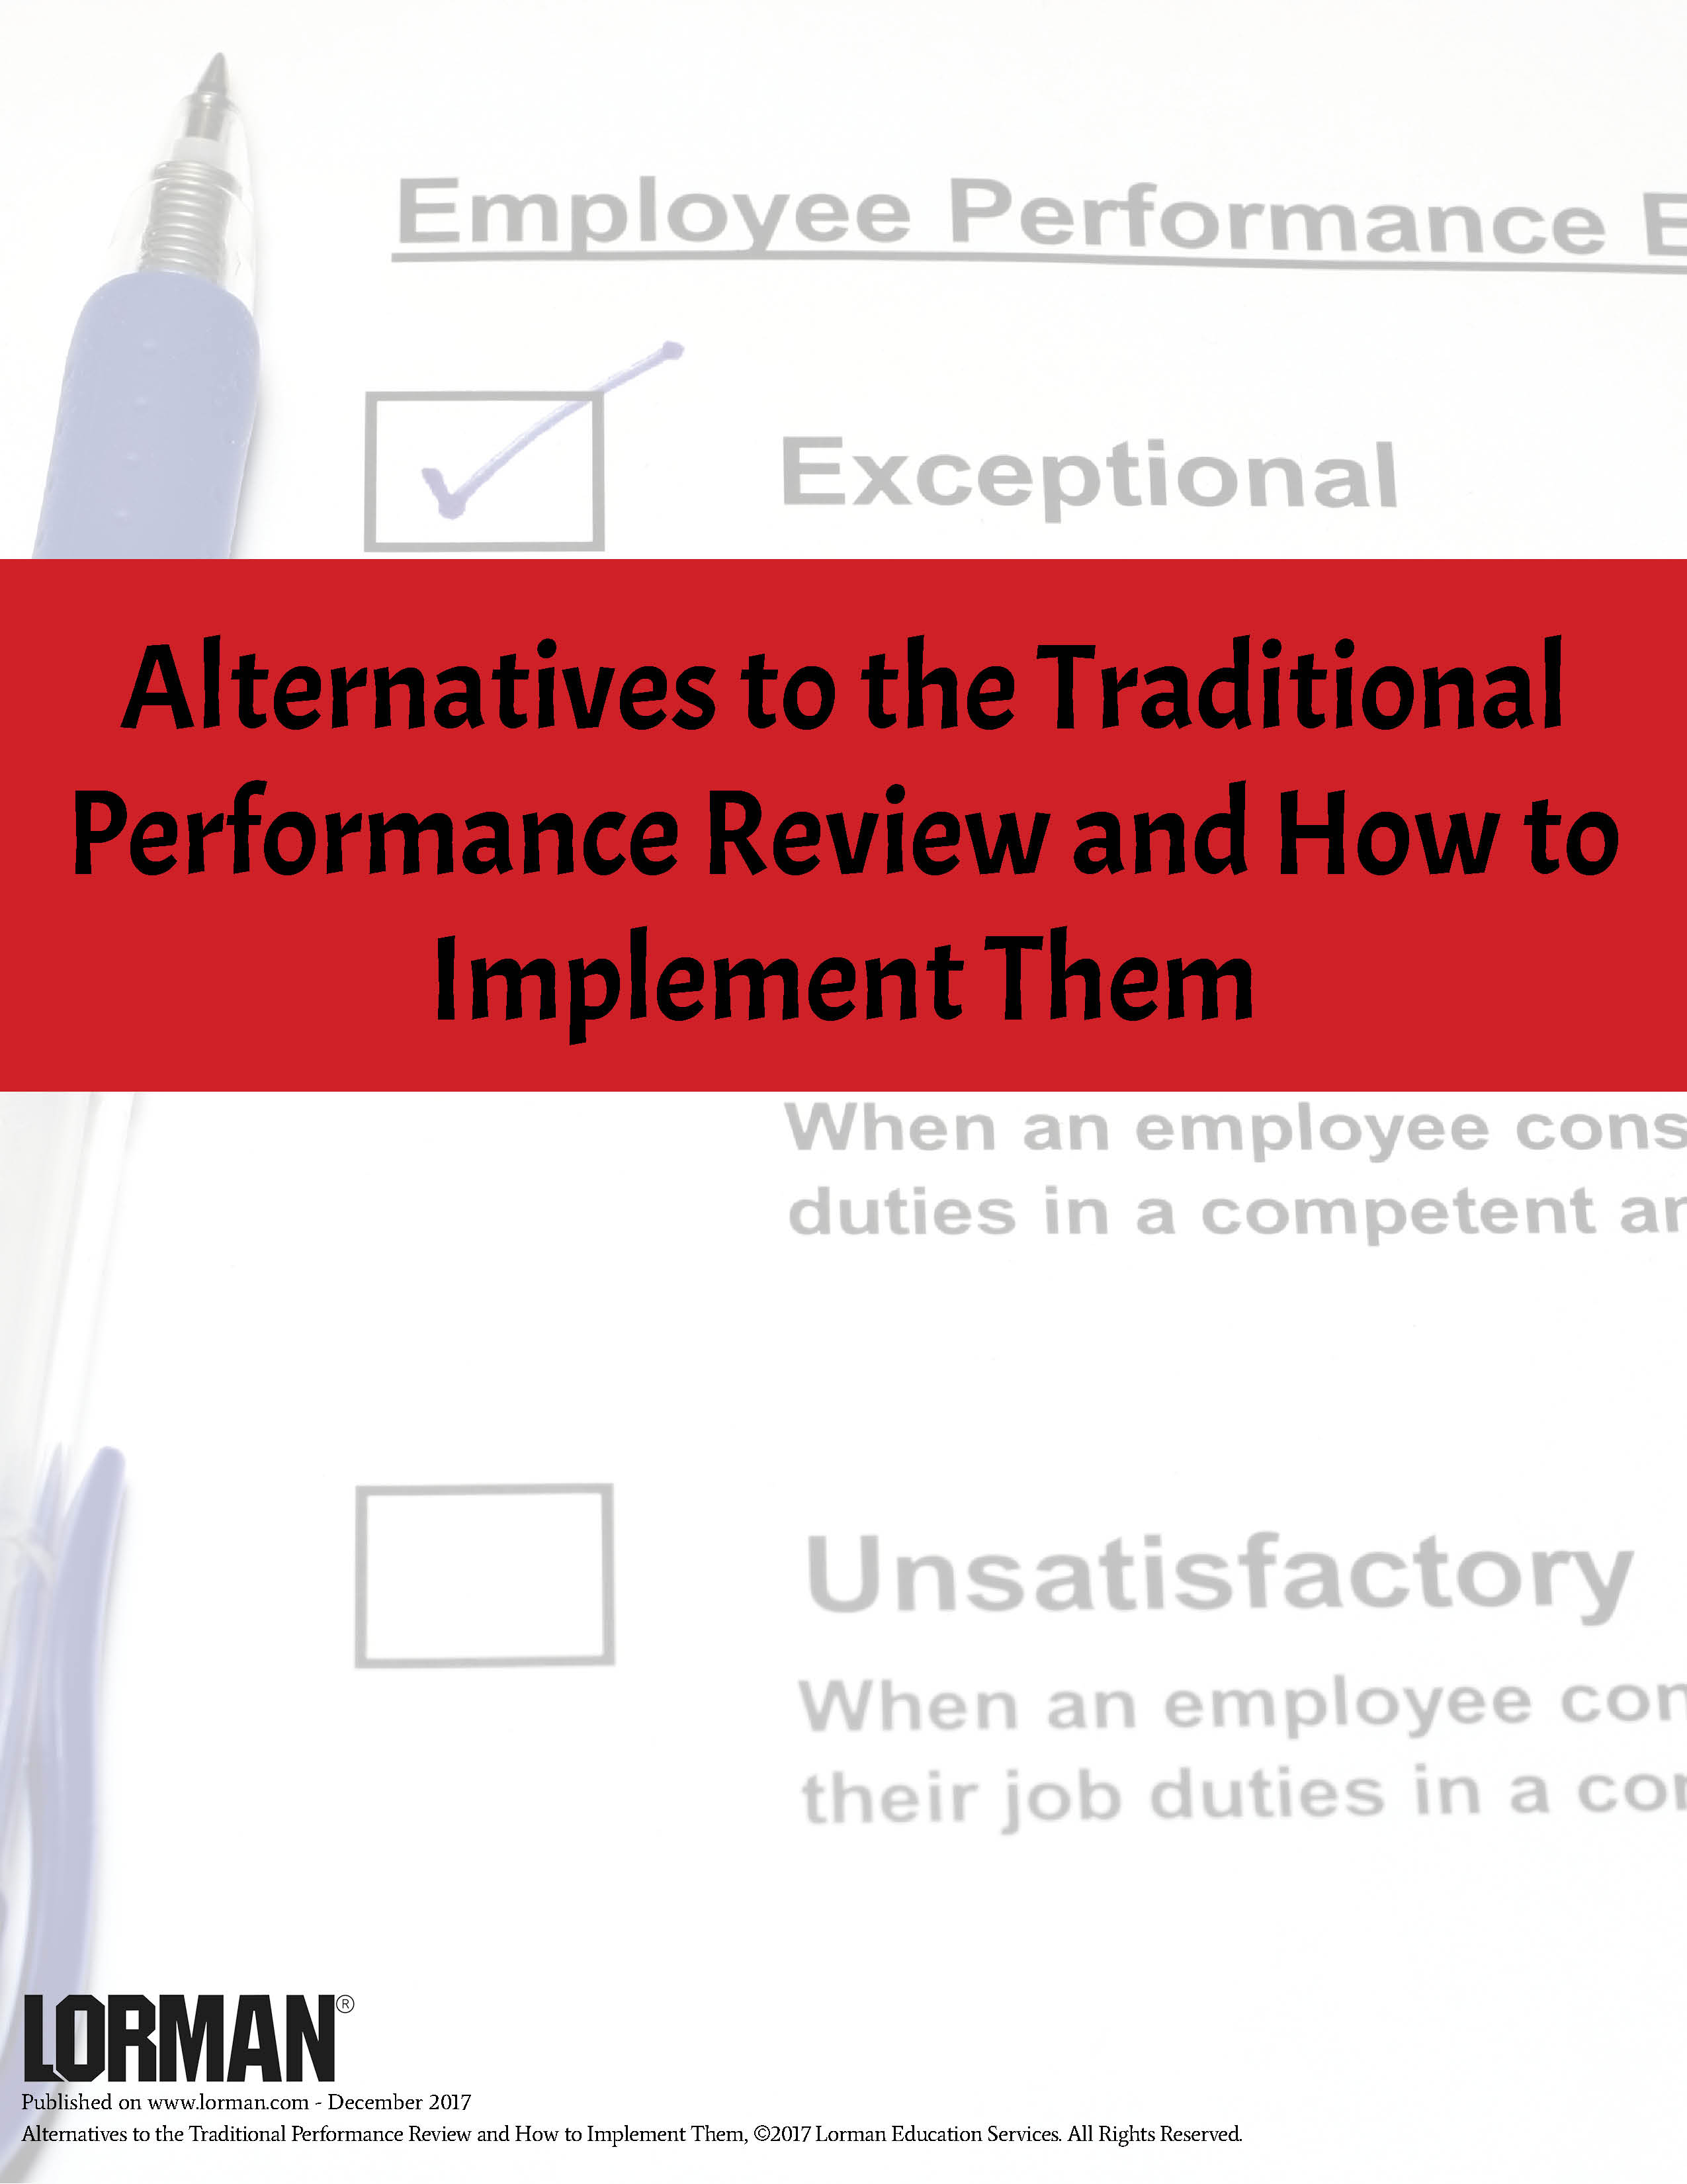 Alternatives to the Traditional Performance Review and How to Implement Them